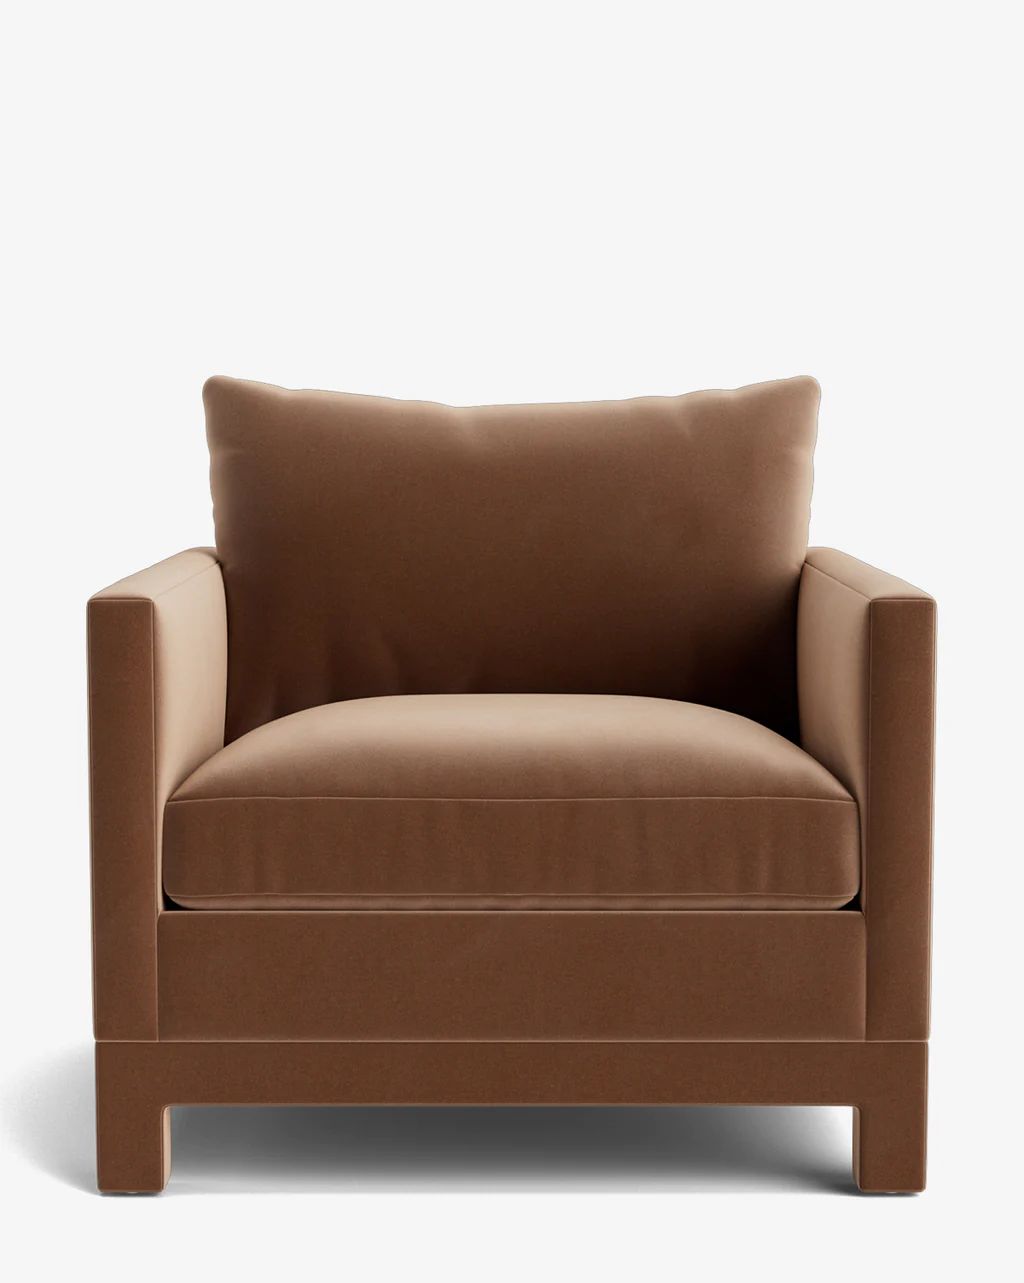 Appoline Lounge Chair | McGee & Co.